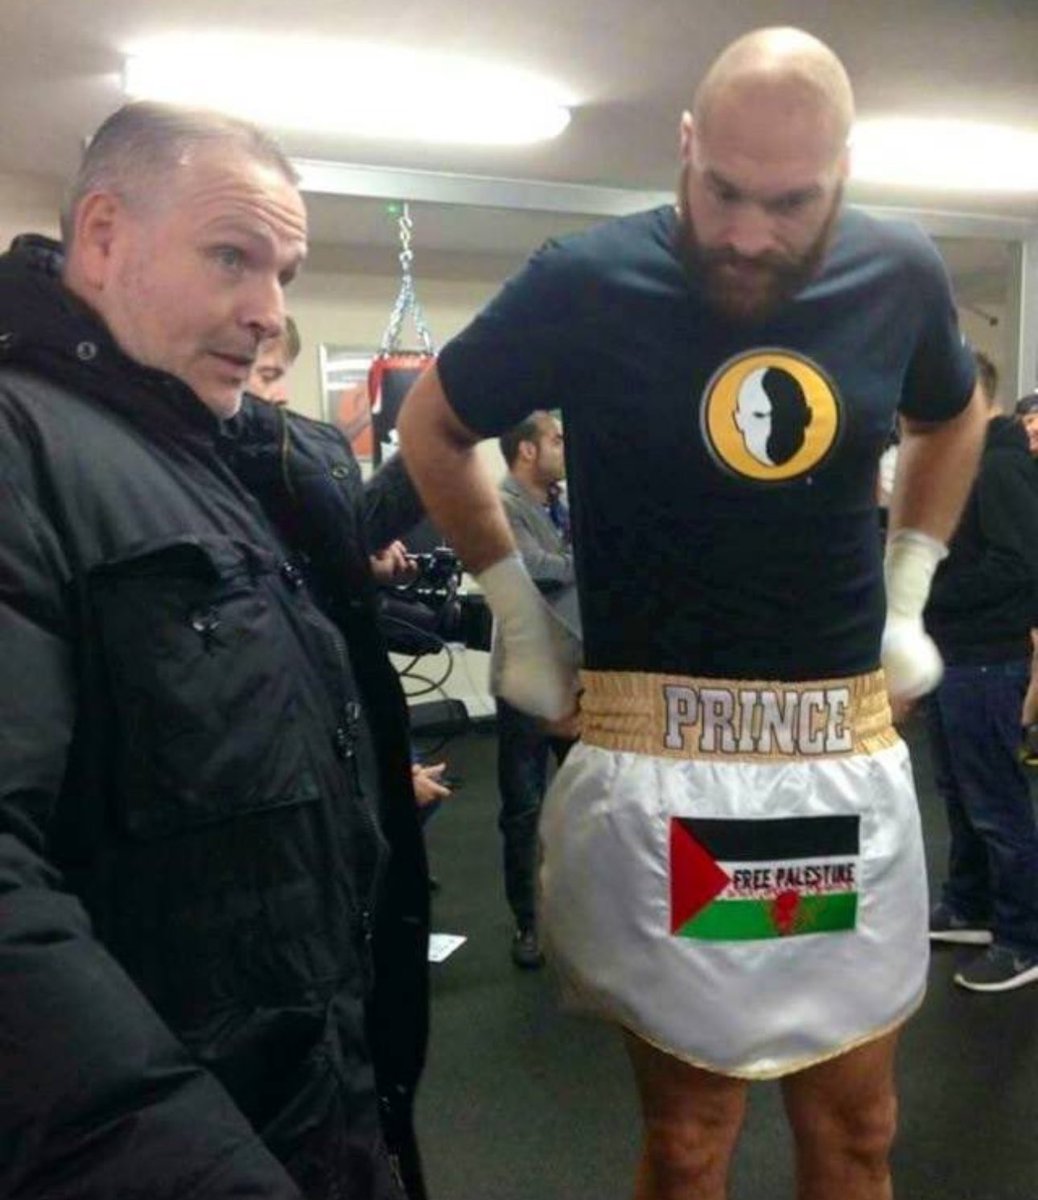 TYSON FURY STANDS FOR PALESTINE

Time to become undisputed heavyweight champion.